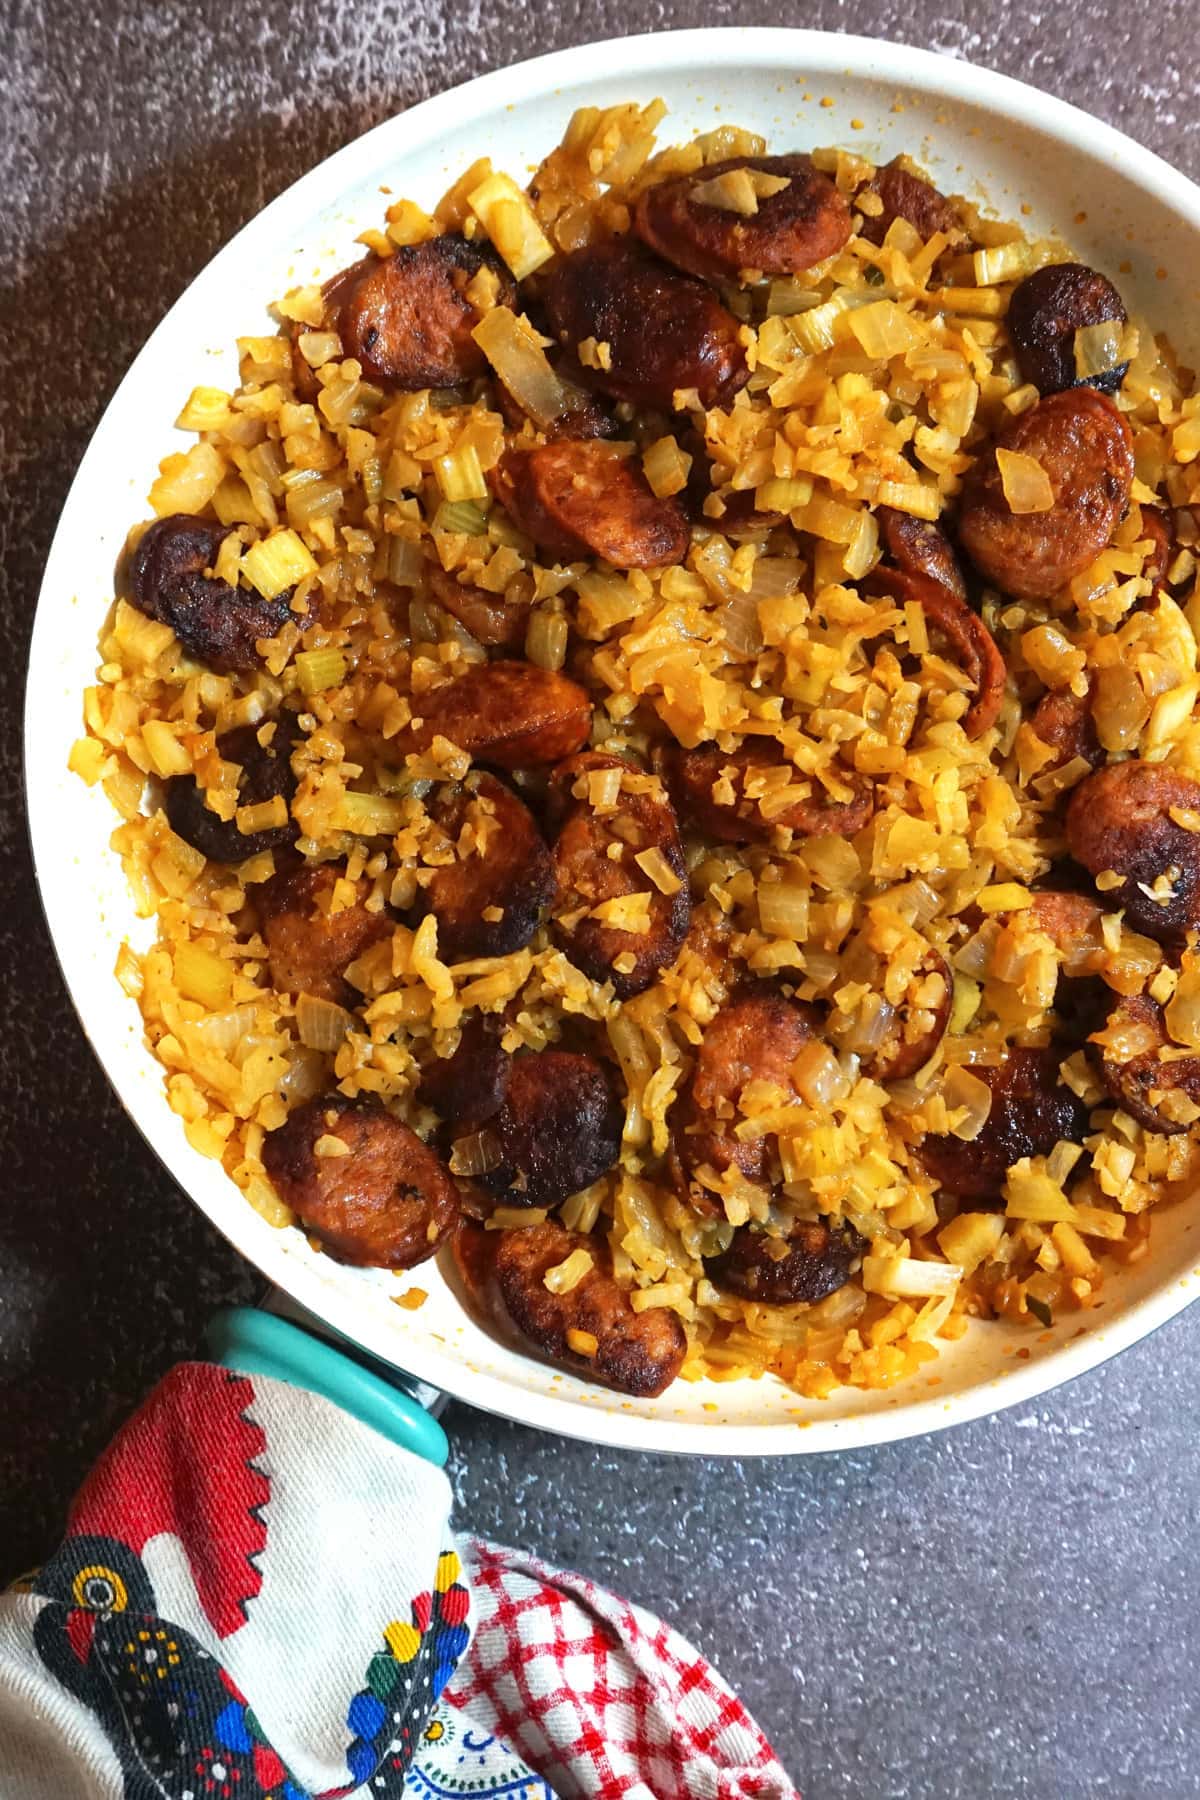 Portuguese Sausage and Rice in the pan